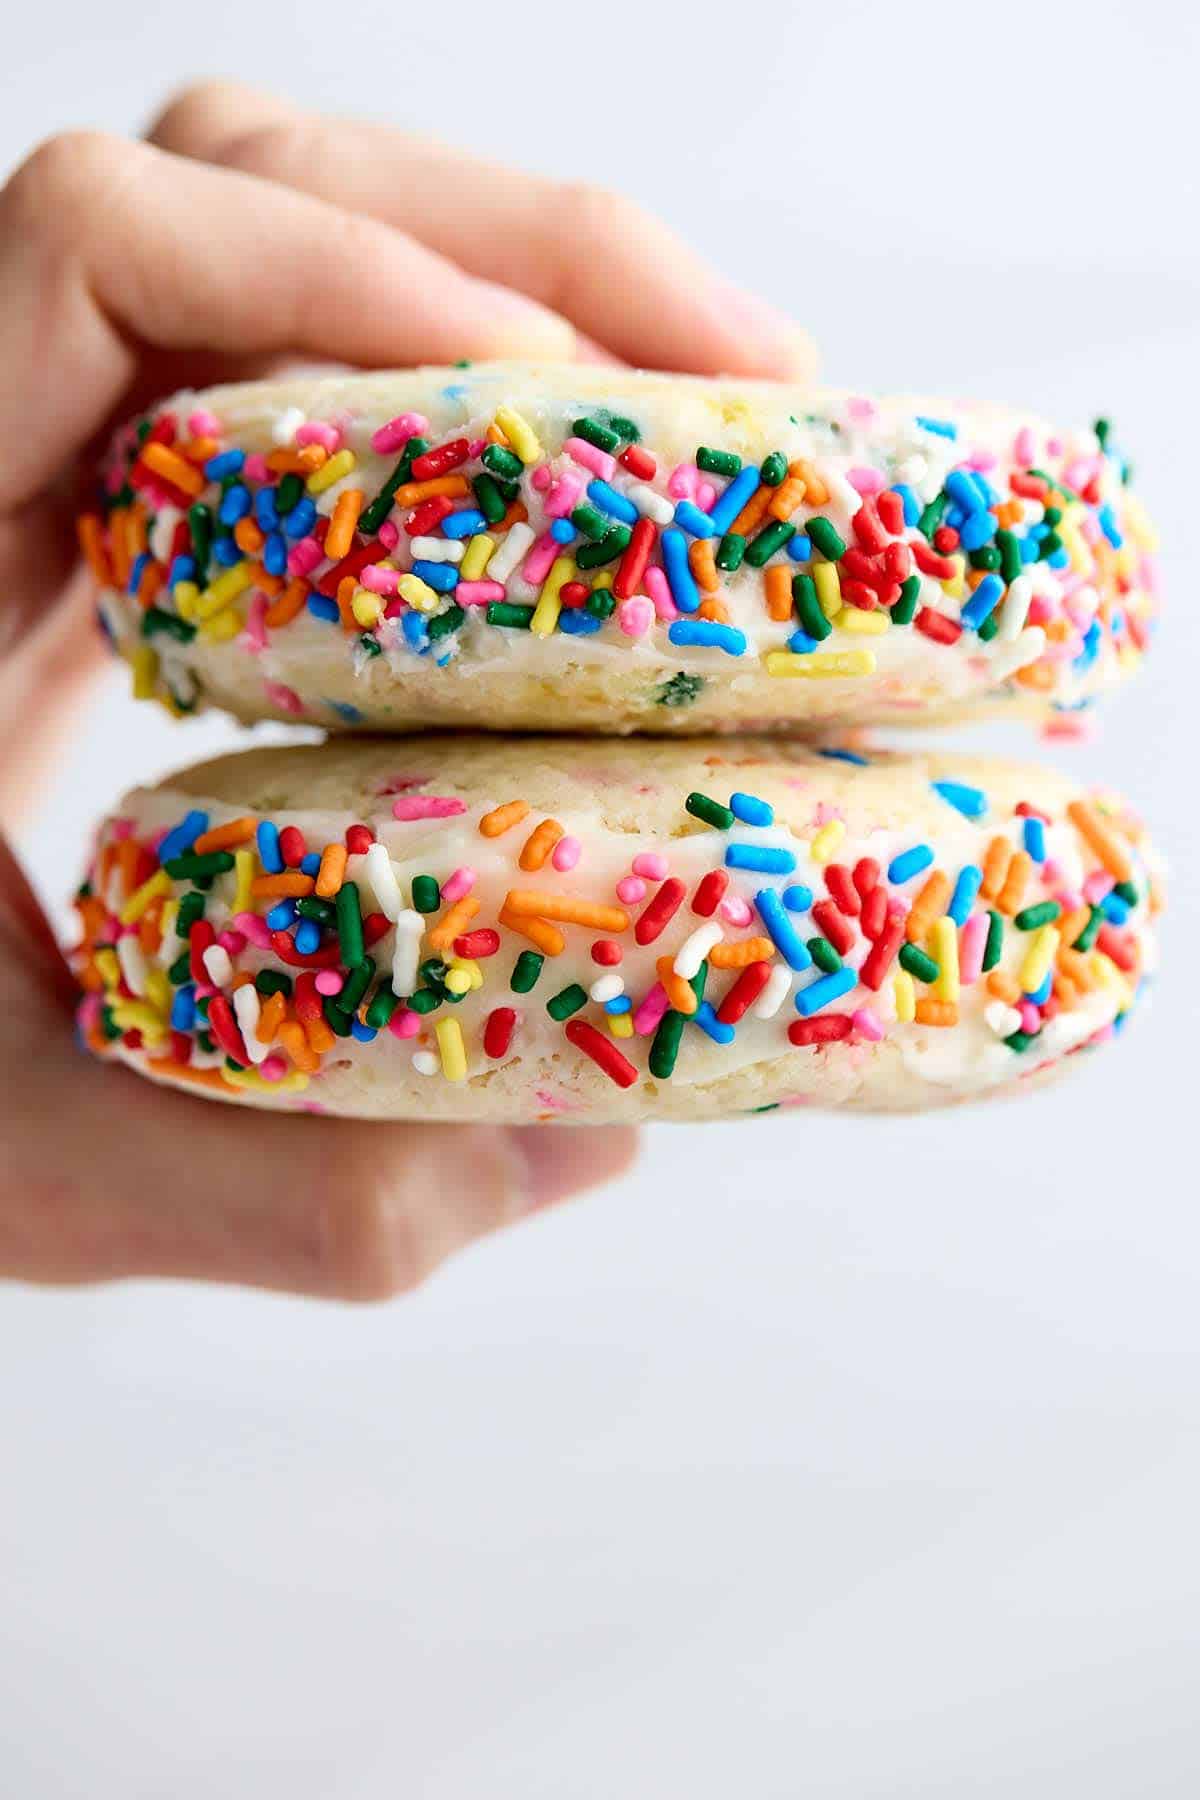 Fingers holding two colorful Funfetti cookie sandwiches so the sprinkle decorations are in view.